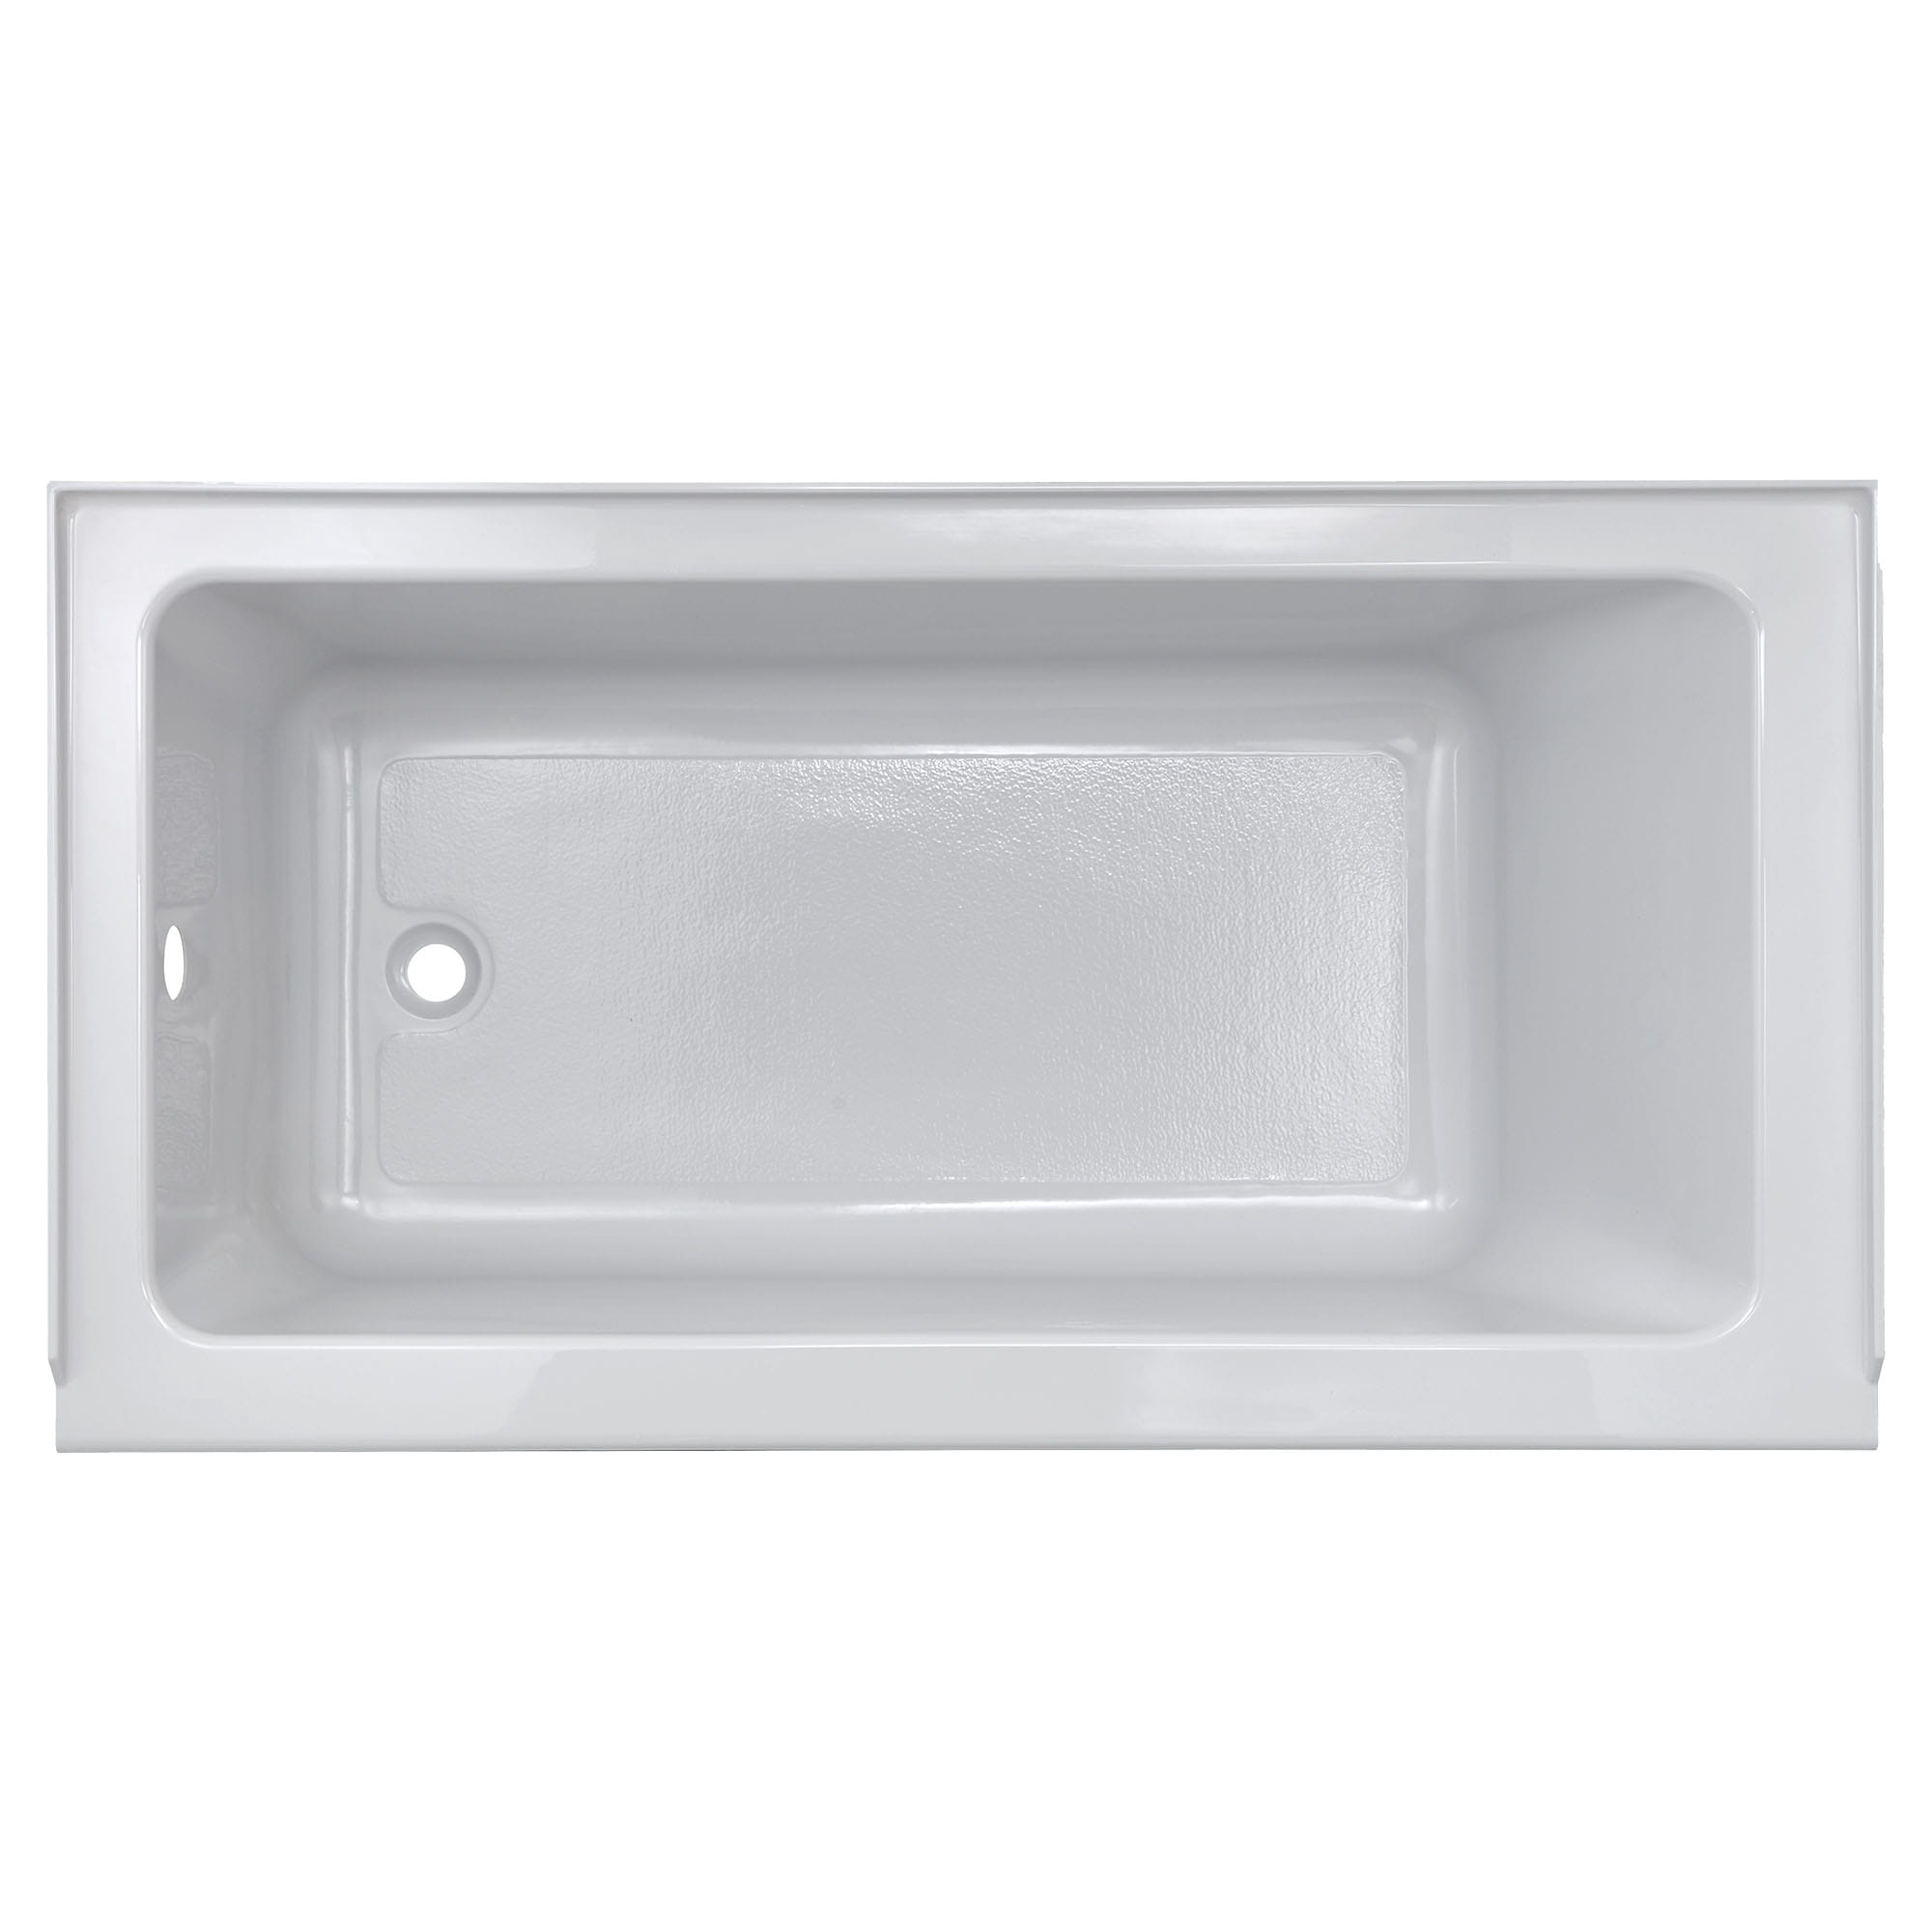 Studio® 60 x 32-Inch Integral Apron Bathtub With Left-Hand Outlet